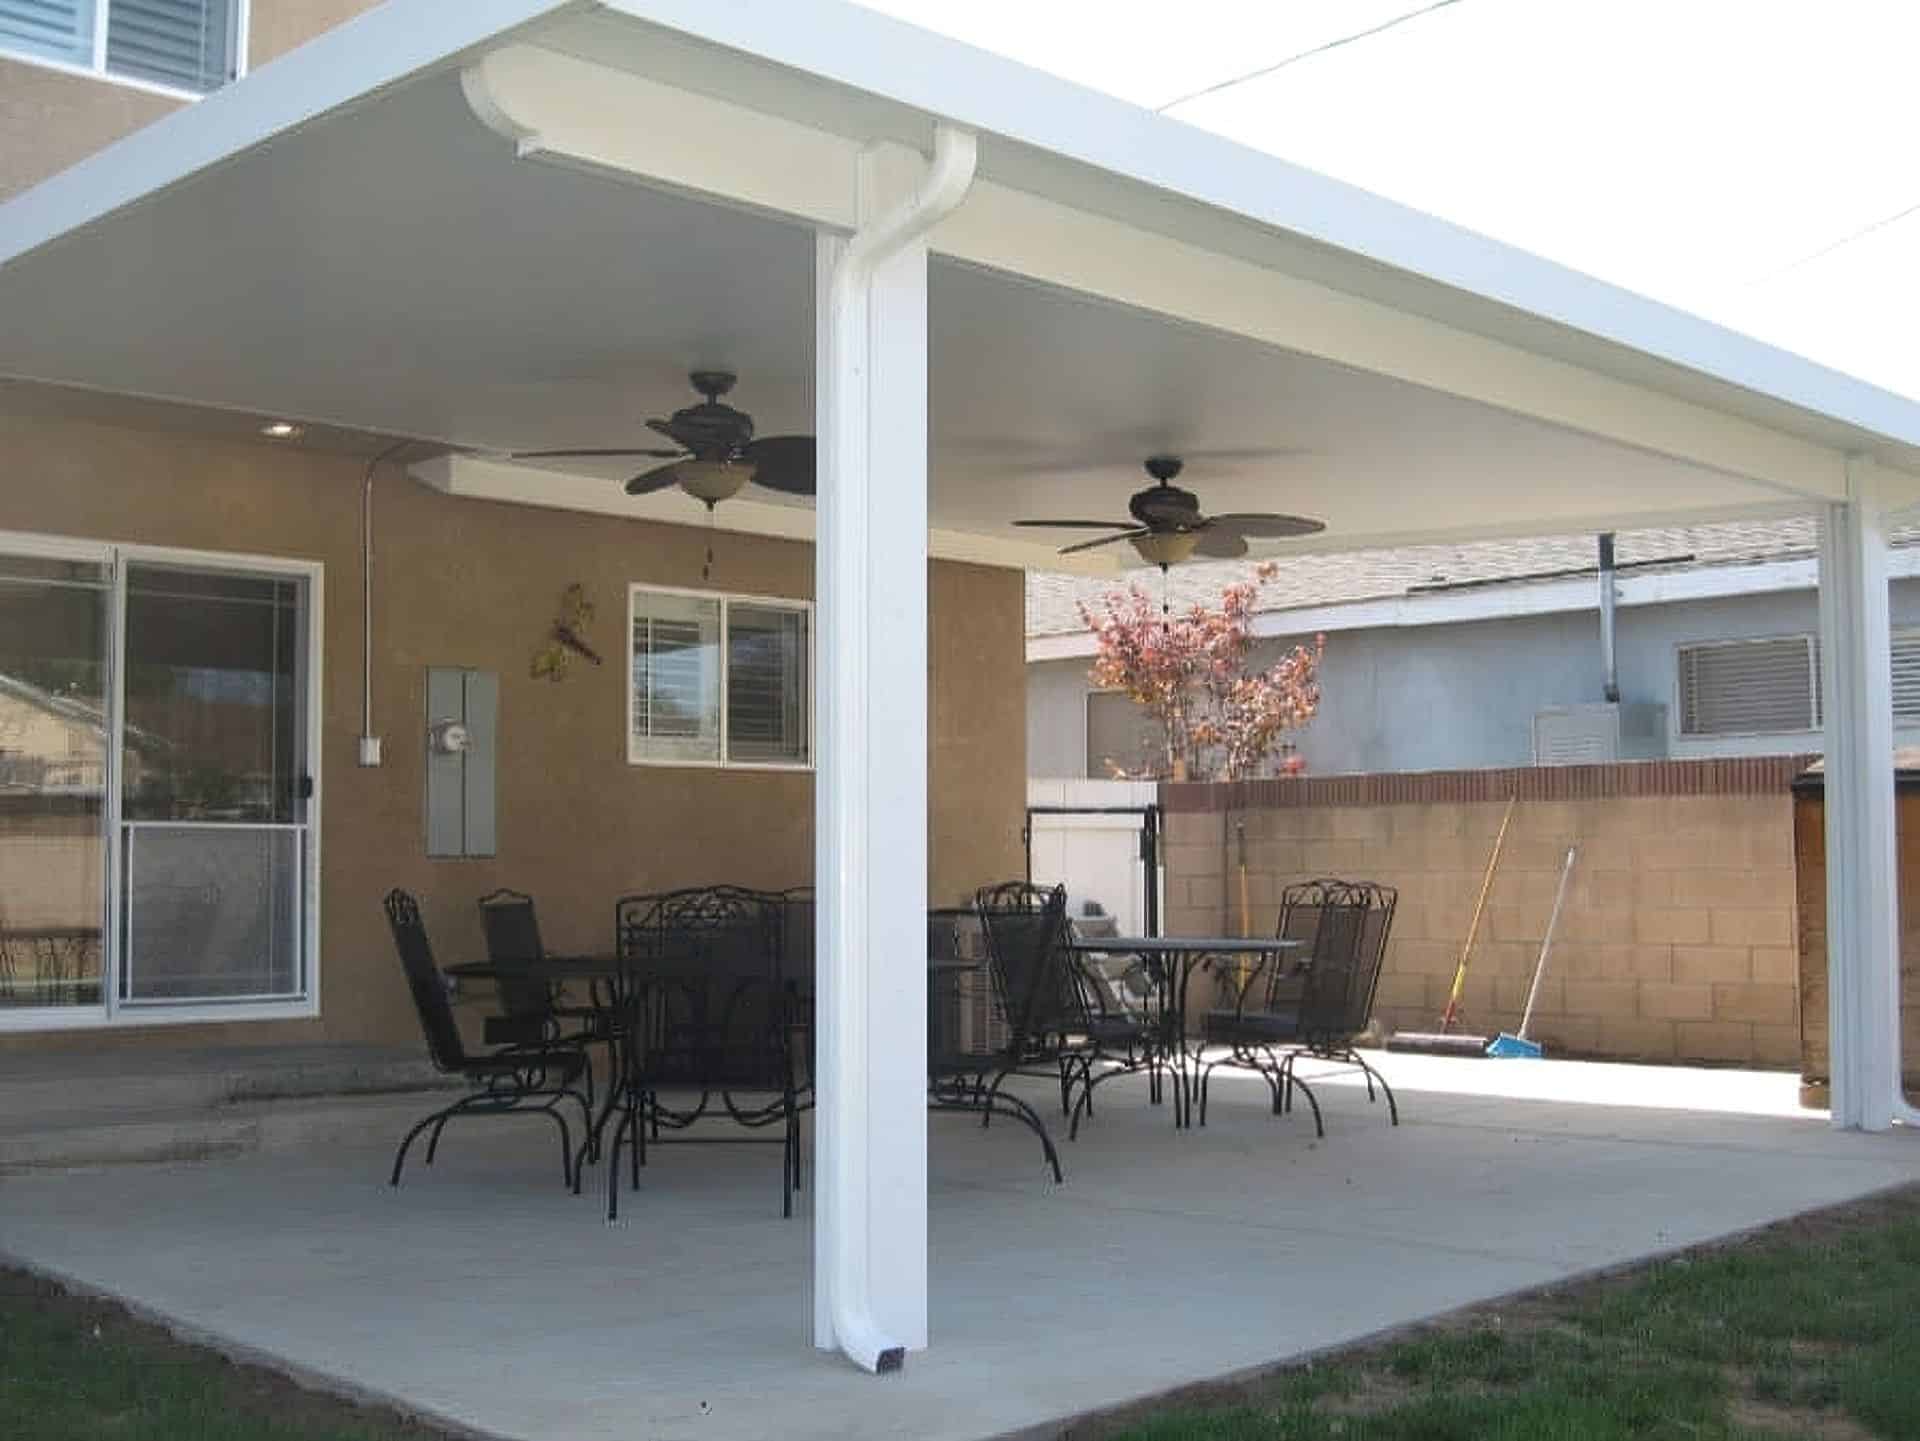 "Vinyl patio awning & glass door on concrete floor. Ceiling fans above. Serene outdoors with trees in the background."